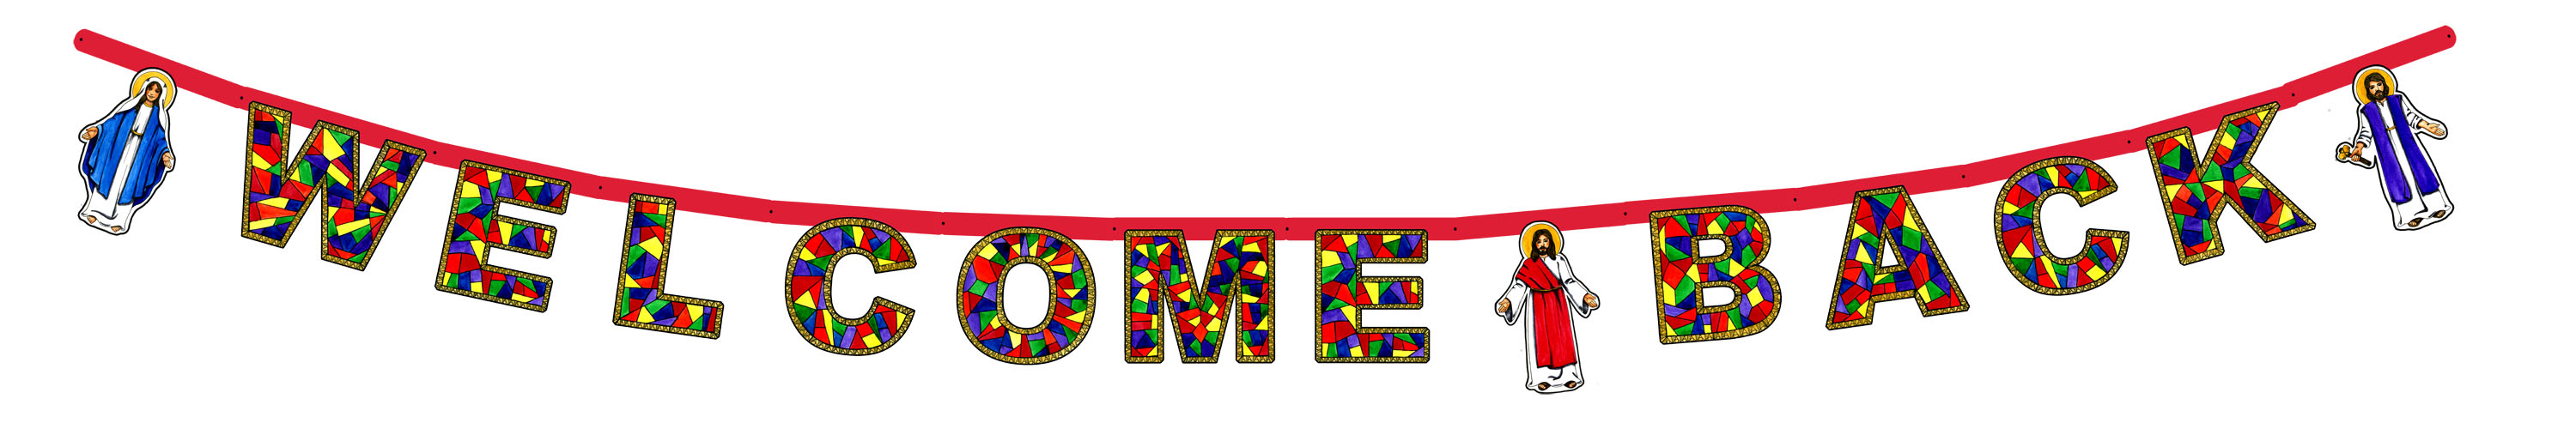 Welcome Back Download On Png Image Clipart